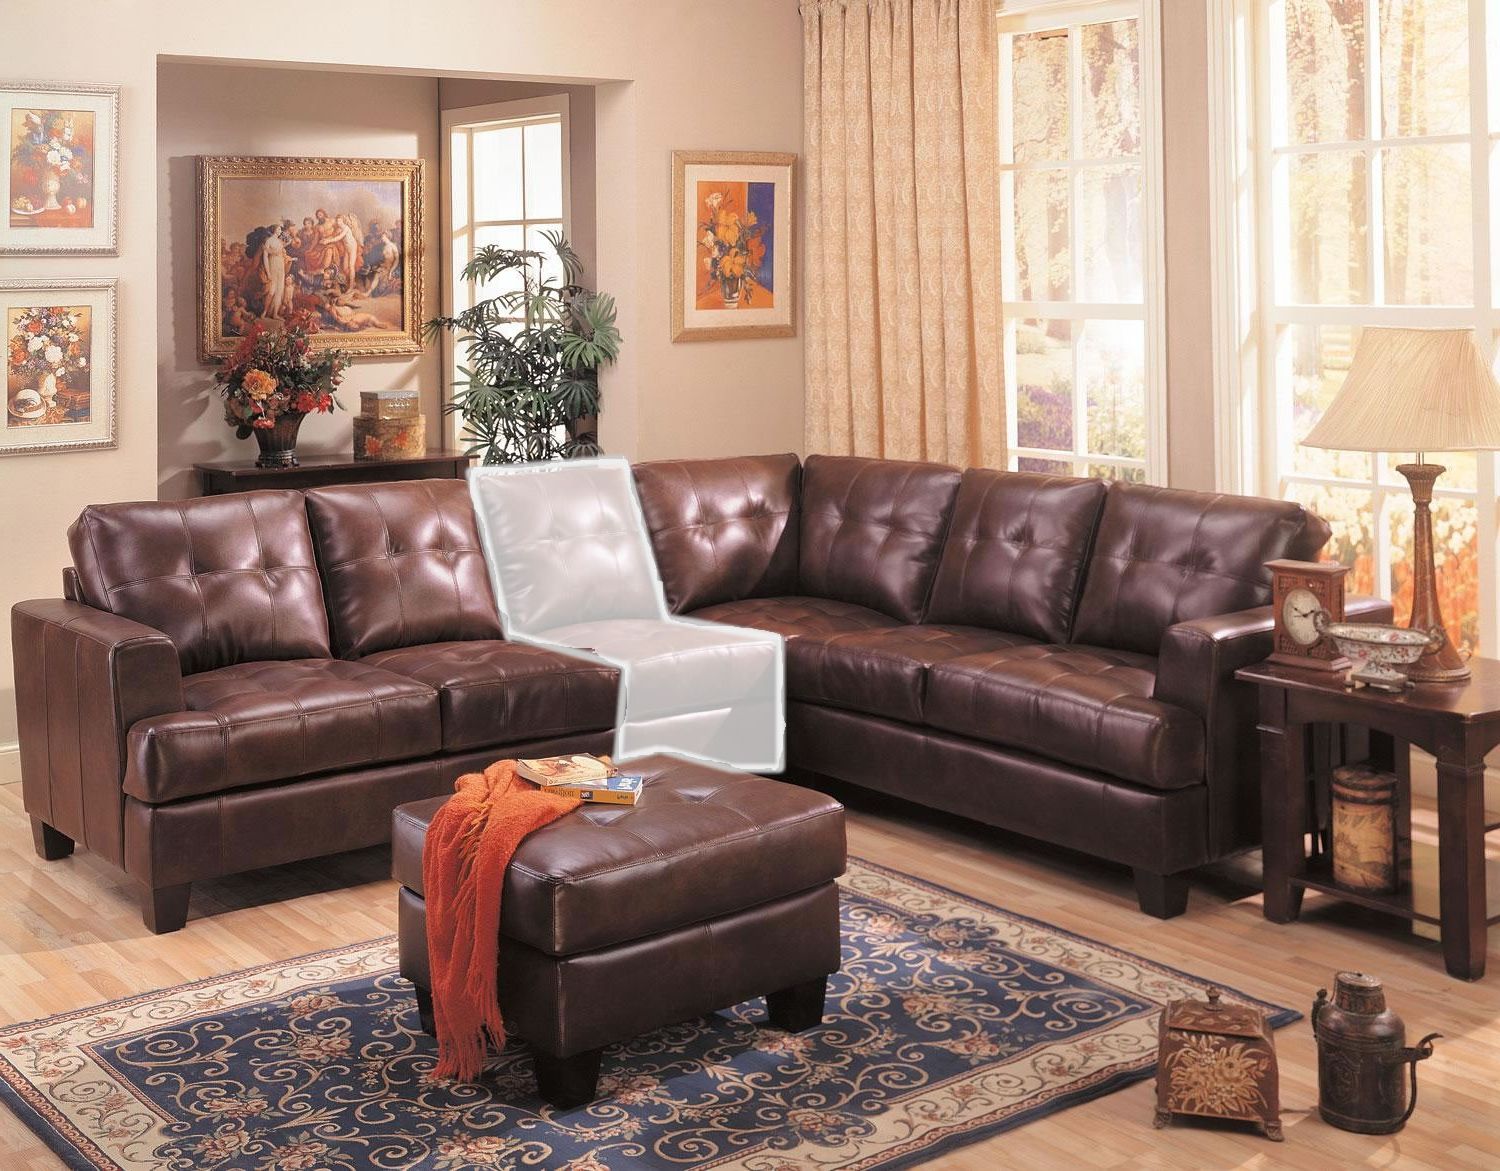 Samuel 3 Piece Brown Leather Sectional Sofa From Coaster (500911 Regarding 3 Piece Leather Sectional Sofa Sets (Gallery 1 of 20)